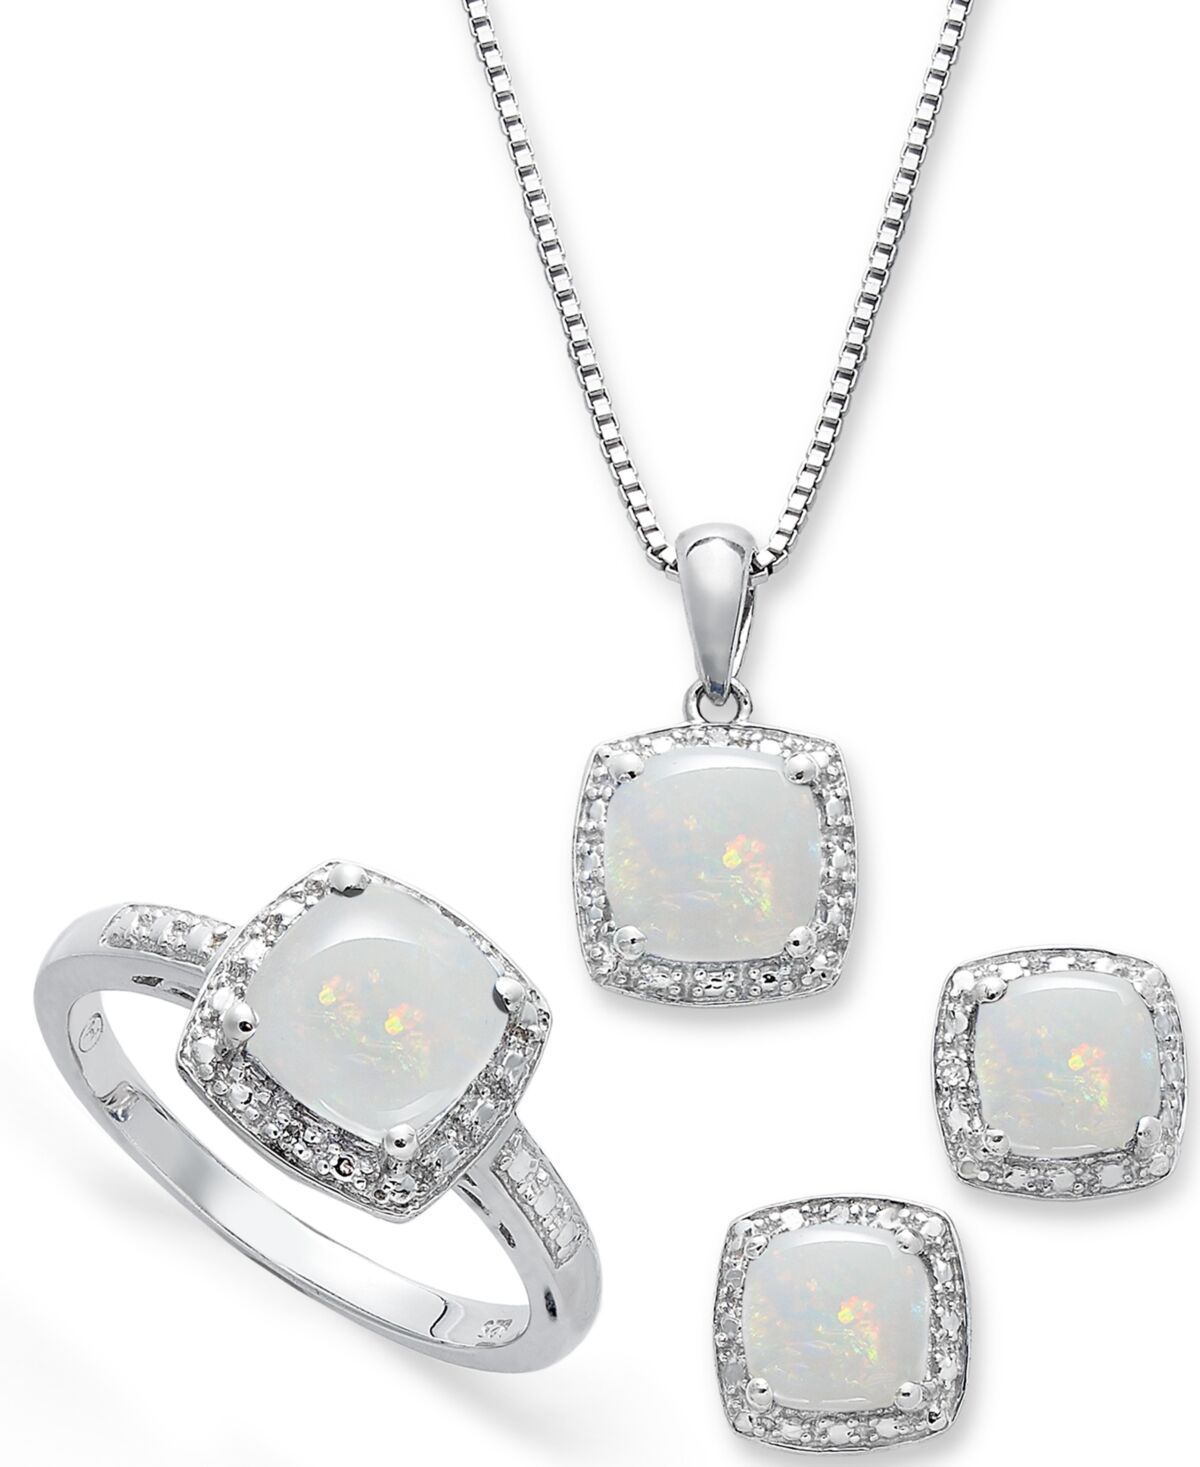 Macy's Sterling Silver Jewelry Set, Opal (4-3/4 ct. t.w.) and Diamond Accent Necklace, Earrings and Ring Set - Opal